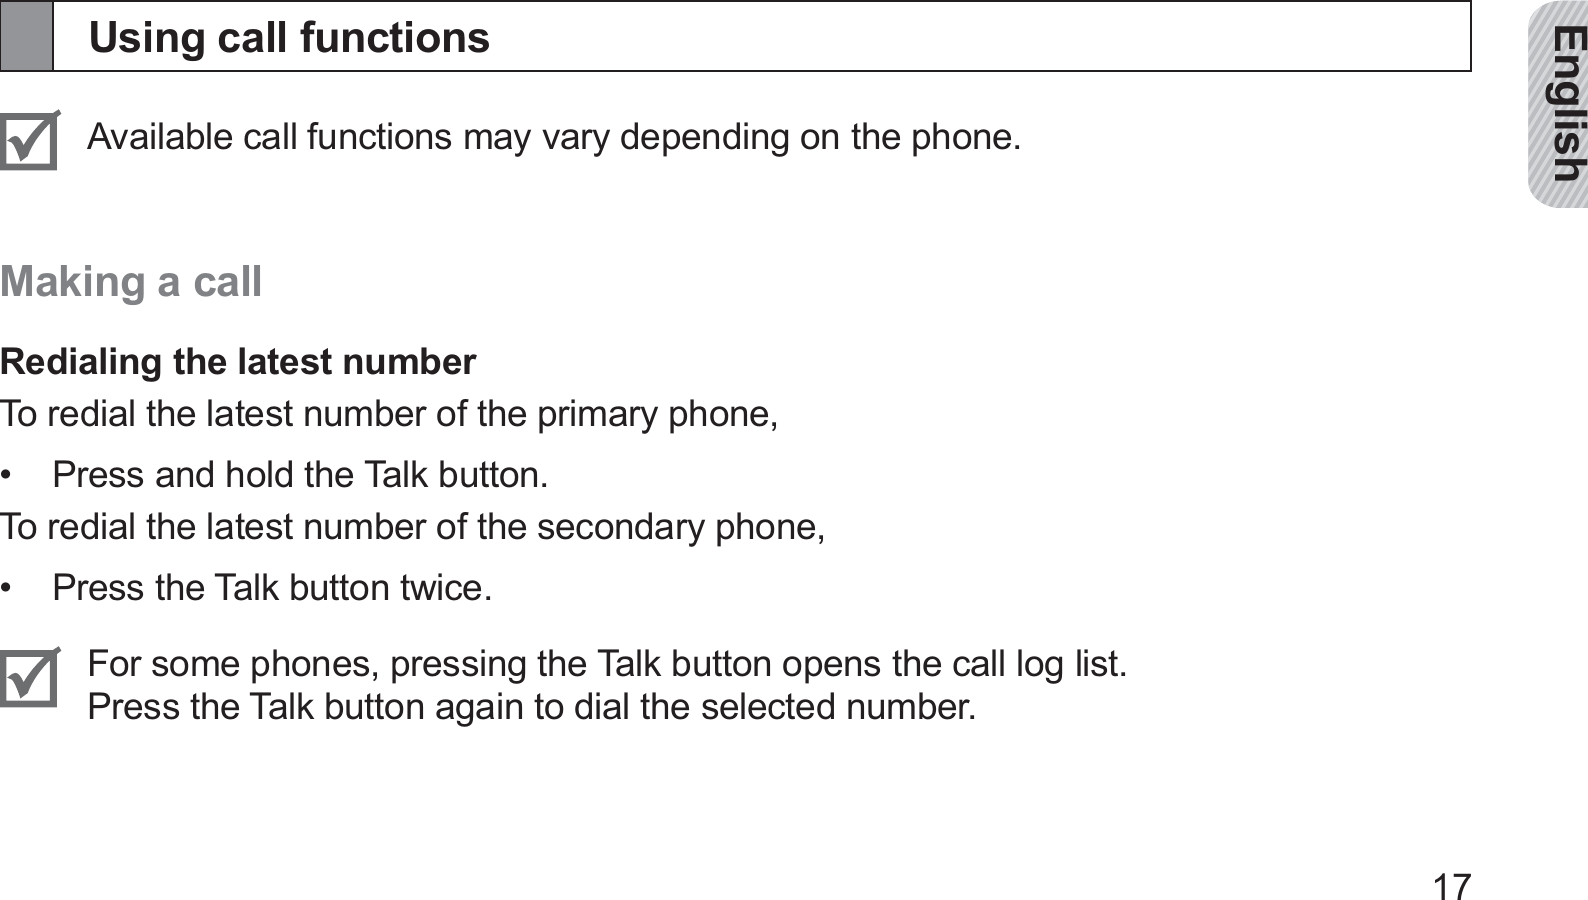 English17Using call functionsAvailable call functions may vary depending on the phone.Making a callRedialing the latest numberTo redial the latest number of the primary phone,Press and hold the Talk button.• To redial the latest number of the secondary phone,Press the Talk button twice.• For some phones, pressing the Talk button opens the call log list.  Press the Talk button again to dial the selected number.